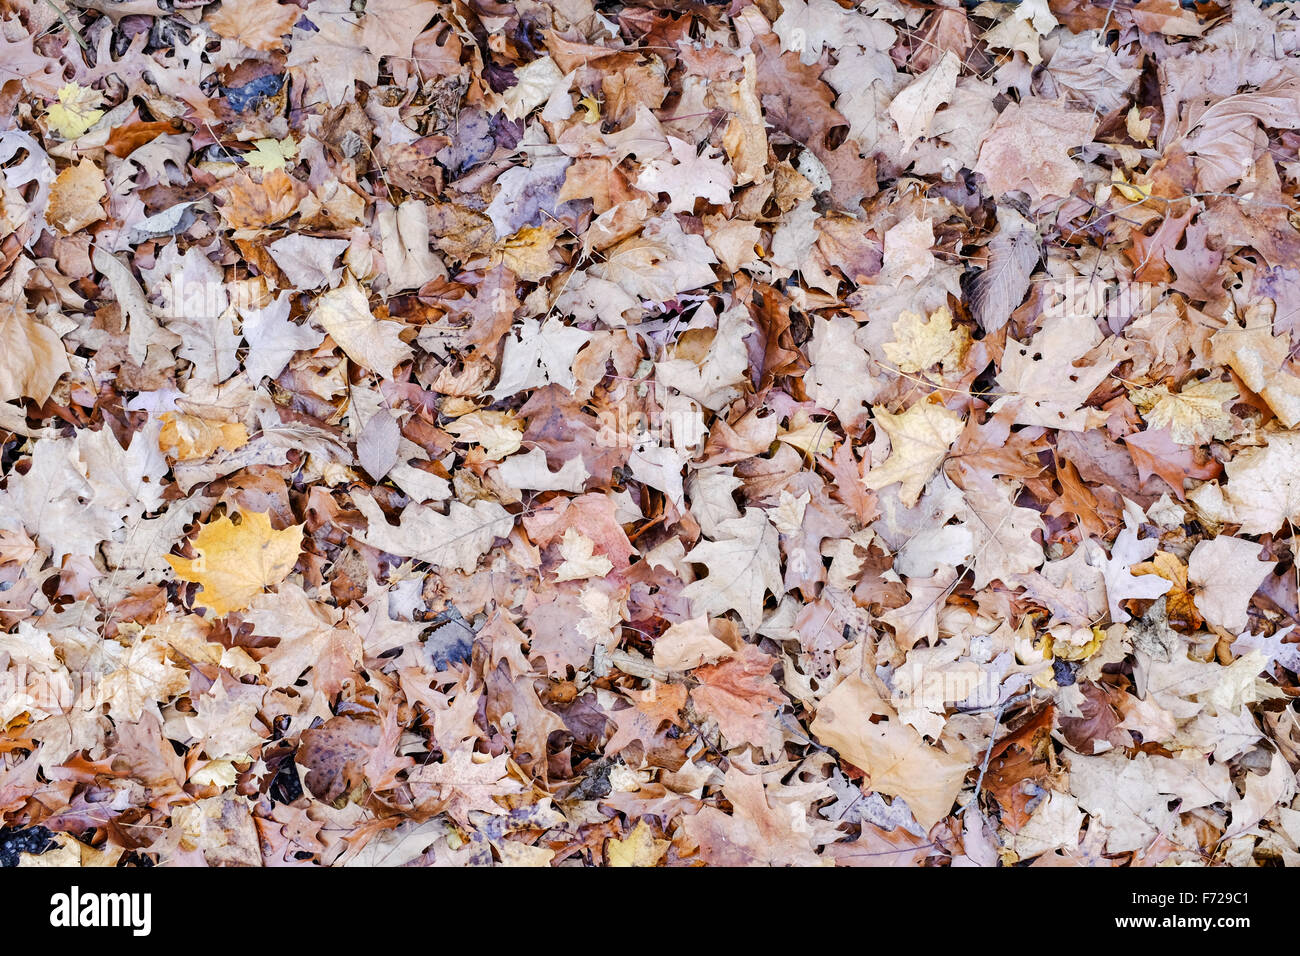 Collection of fall leaves scattered on the ground Stock Photo